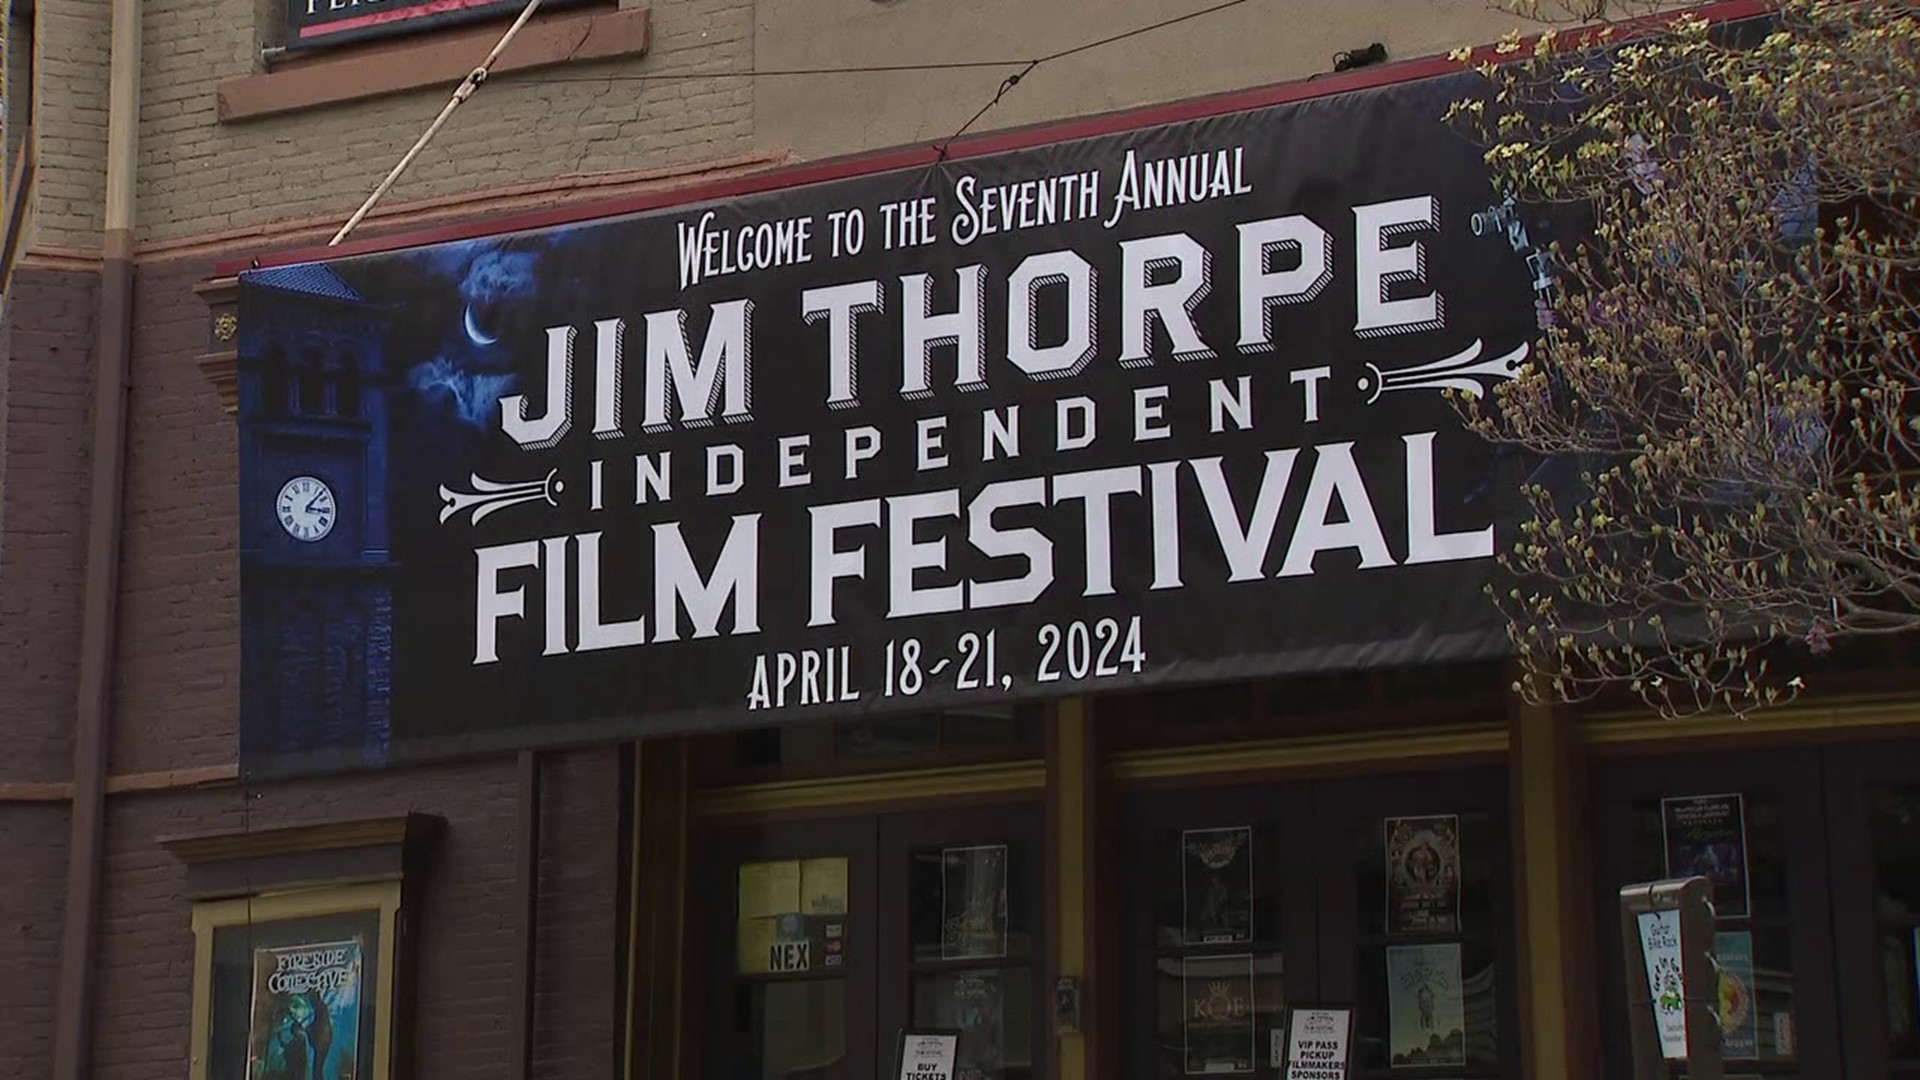 The four-day event features 90 different films across different genres inside the Mauch Chunk Opera House.